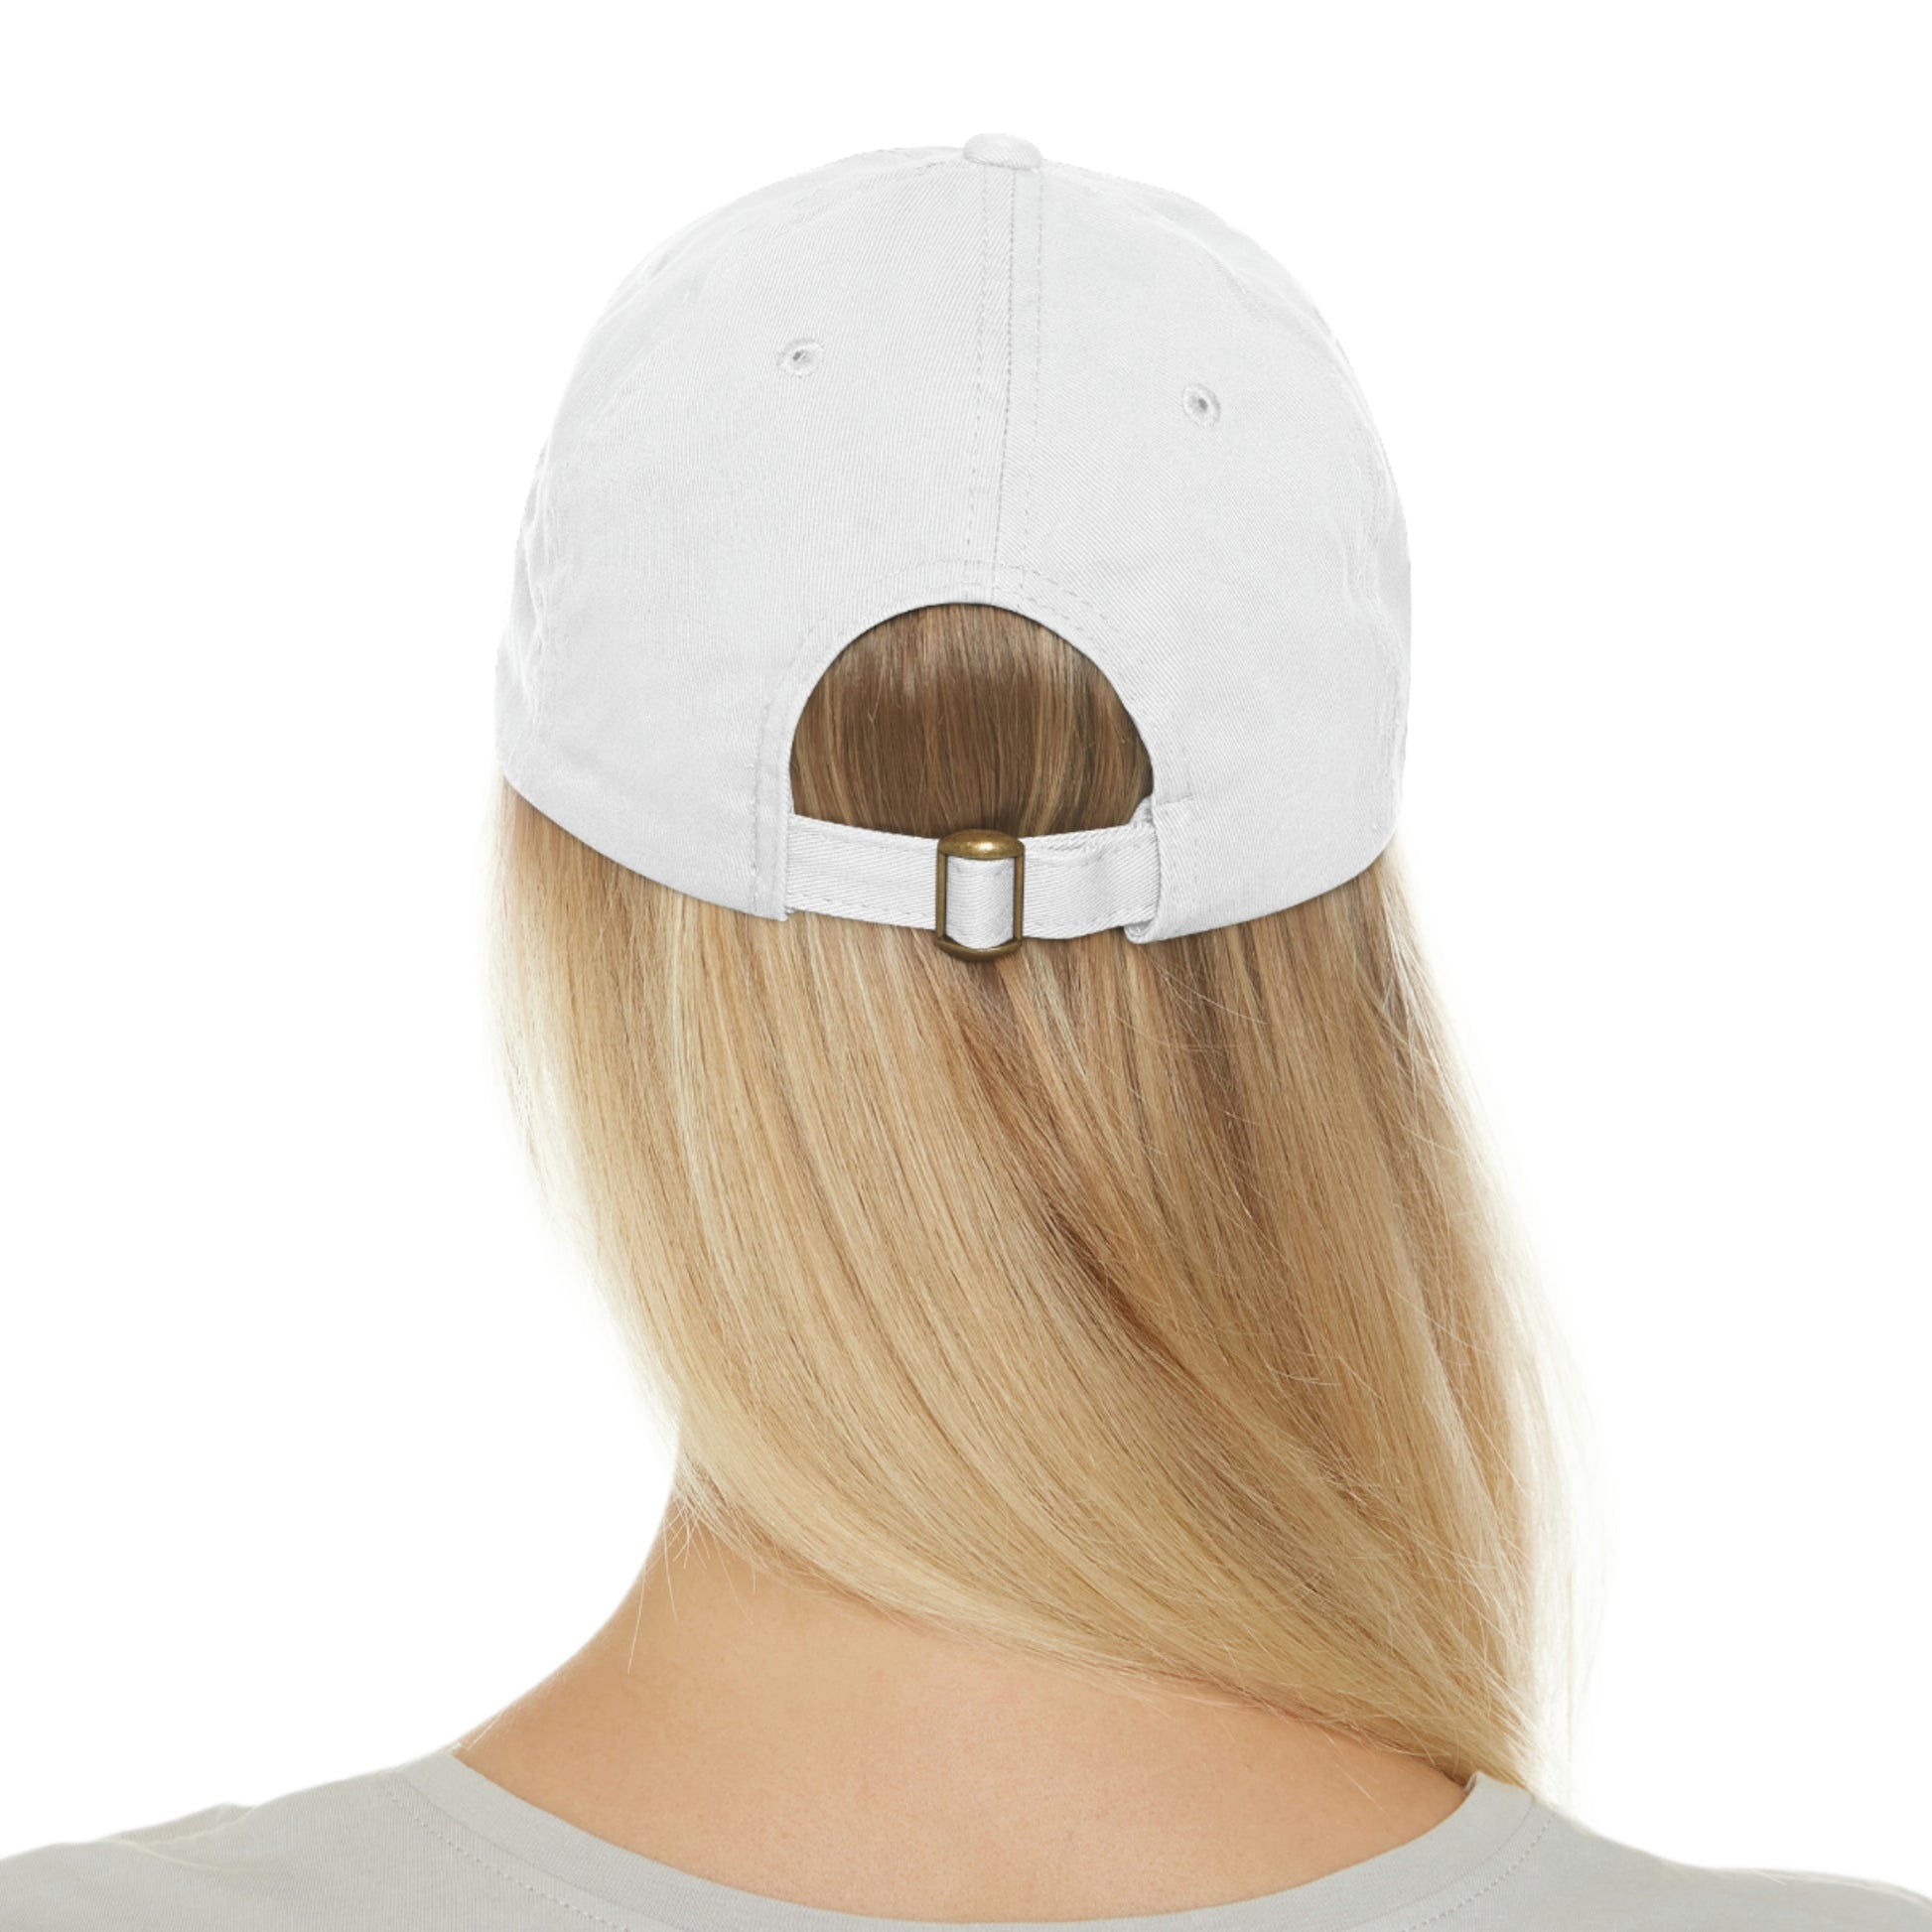 repeak energy dad hat, black, white, and pink, backside on model